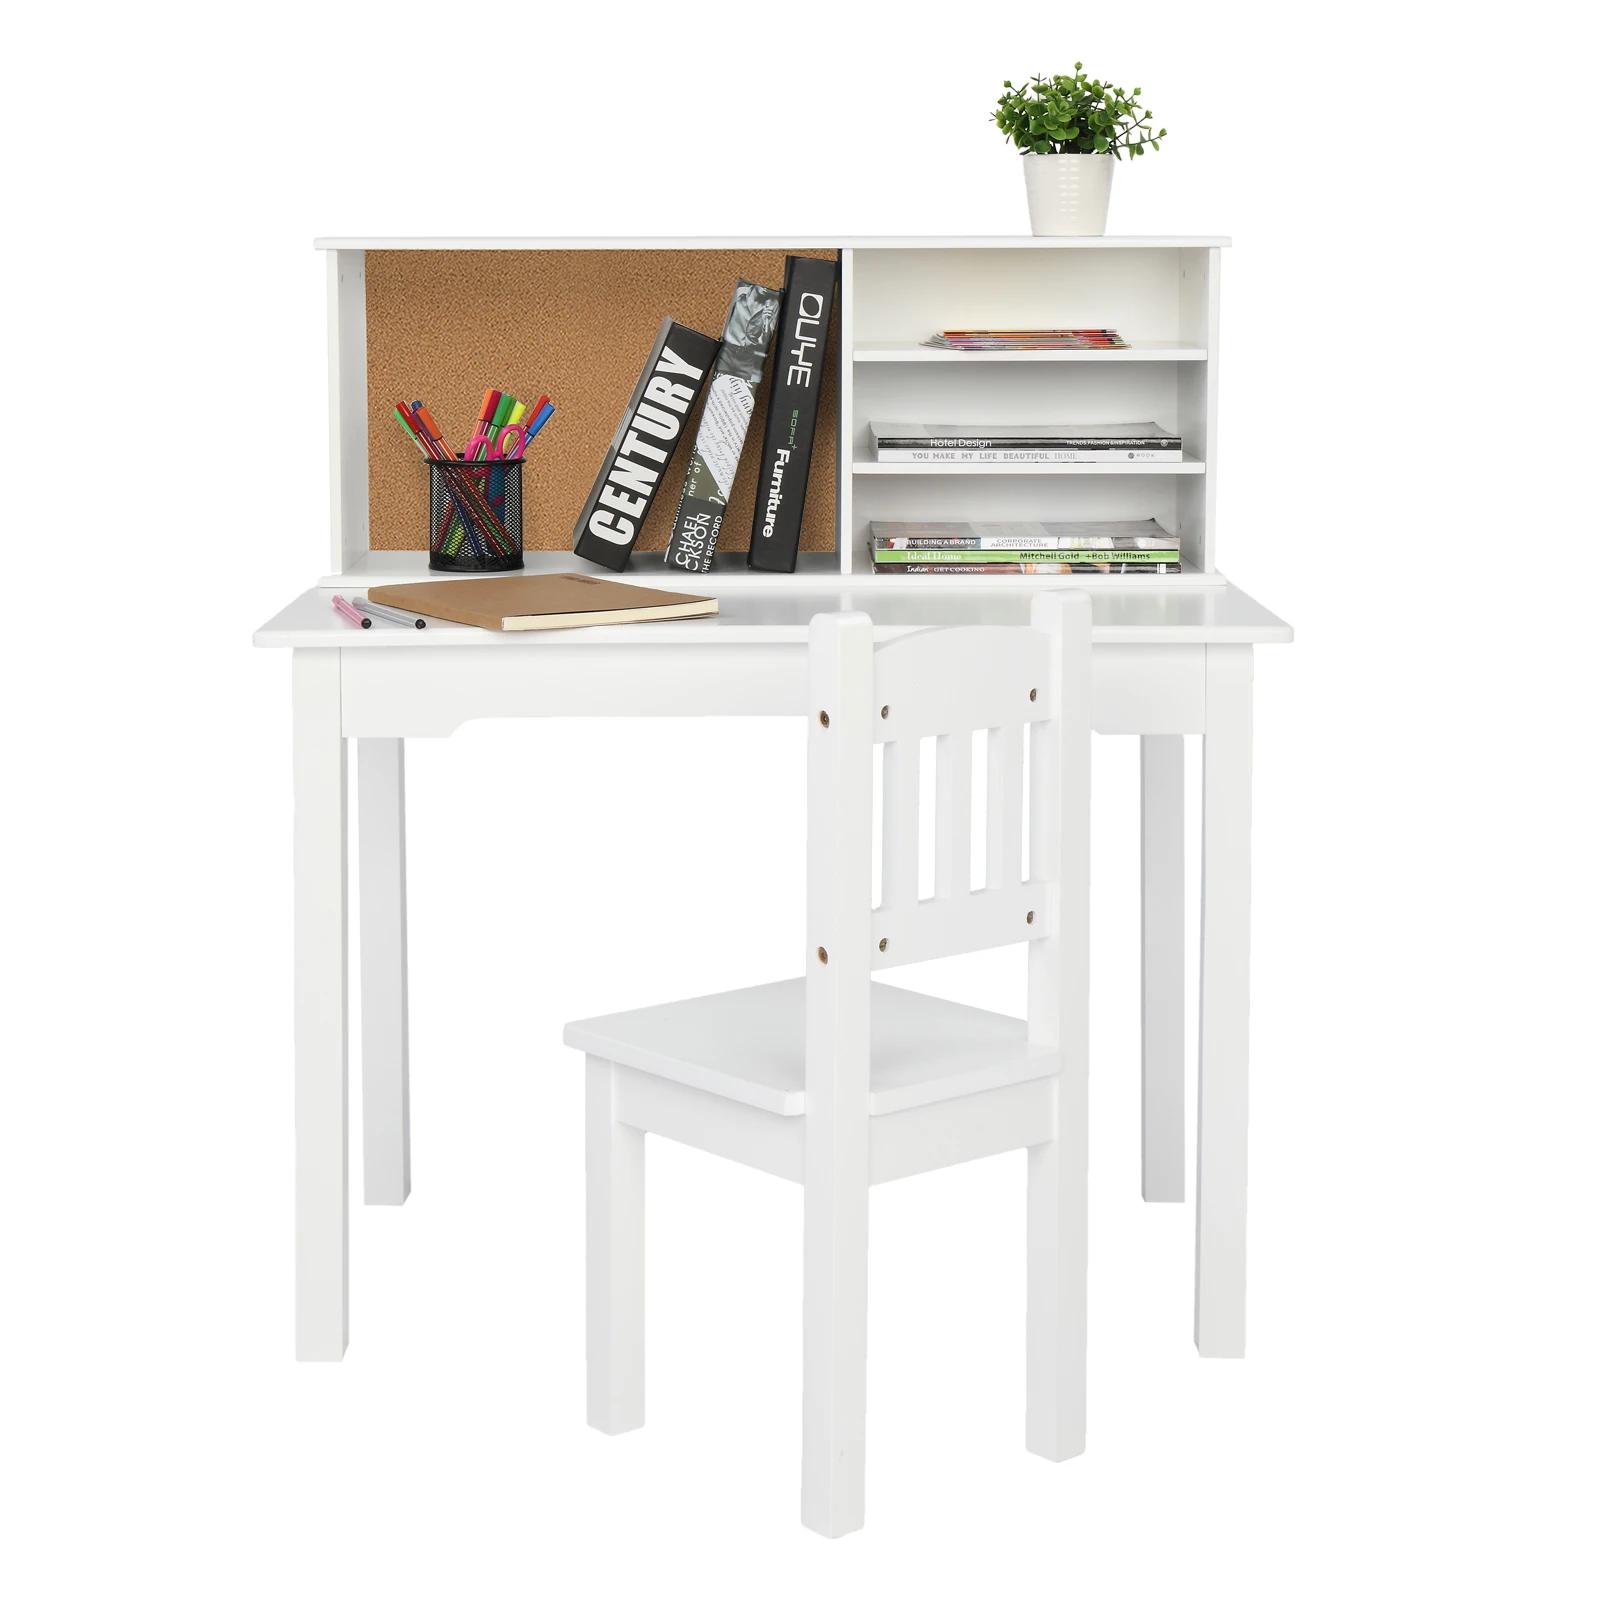 

【USA READY STOCK】Painted Student Table and Chair Set A, White, for Kids, 5-layer Desktop, Multifunctional (80*50*88.5cm)